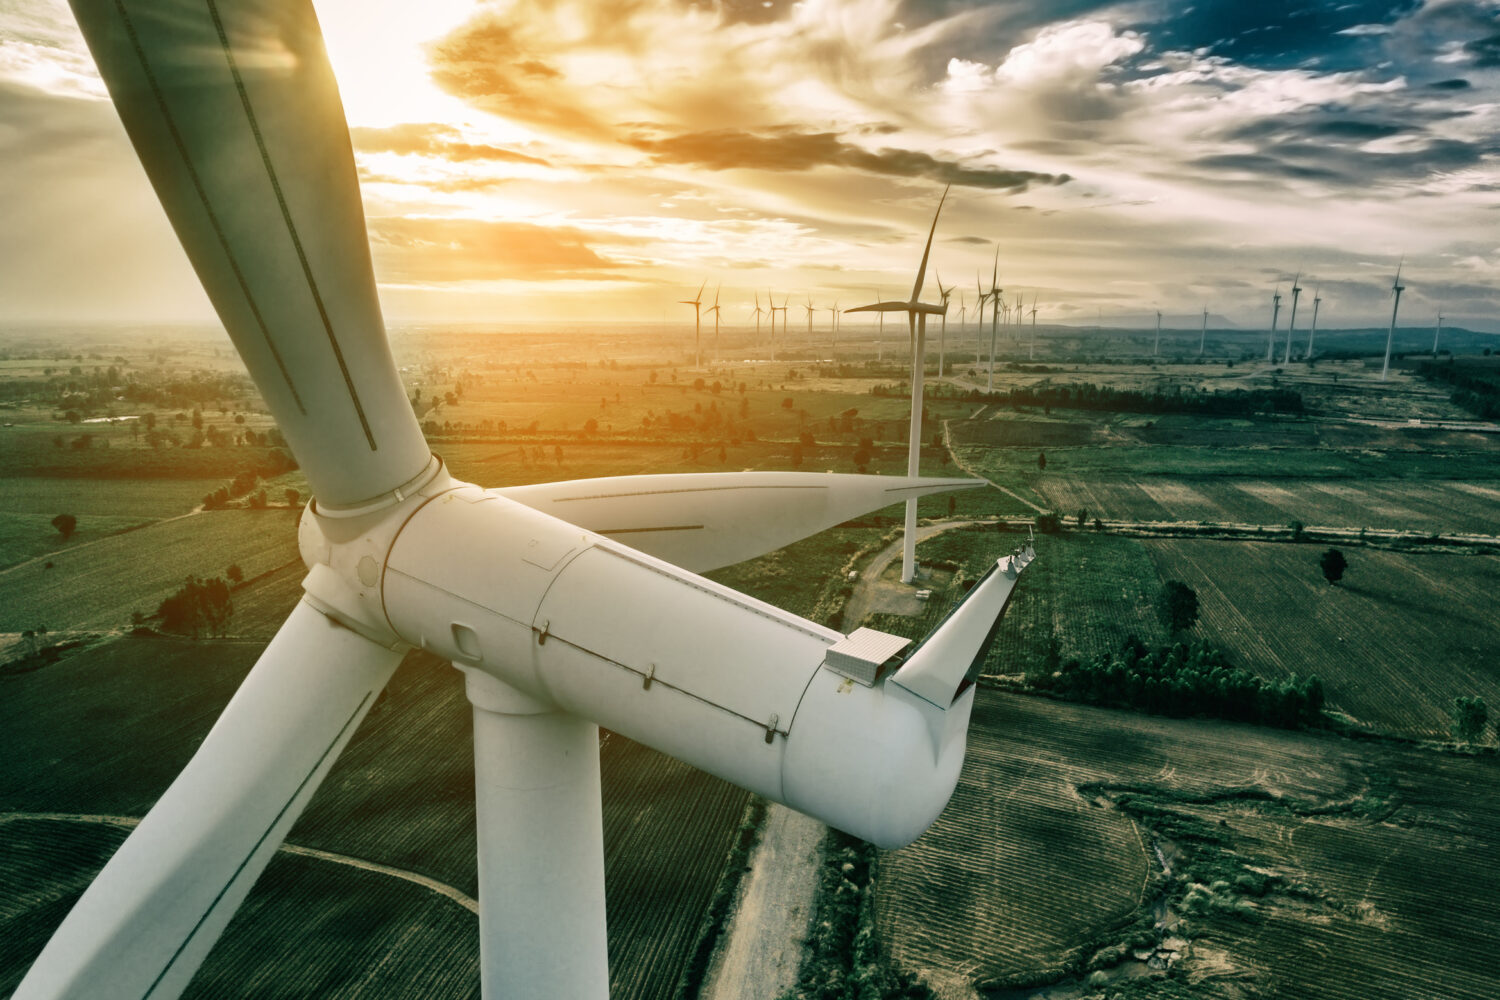 Experts from the top renewable energy companies weigh in on the industry